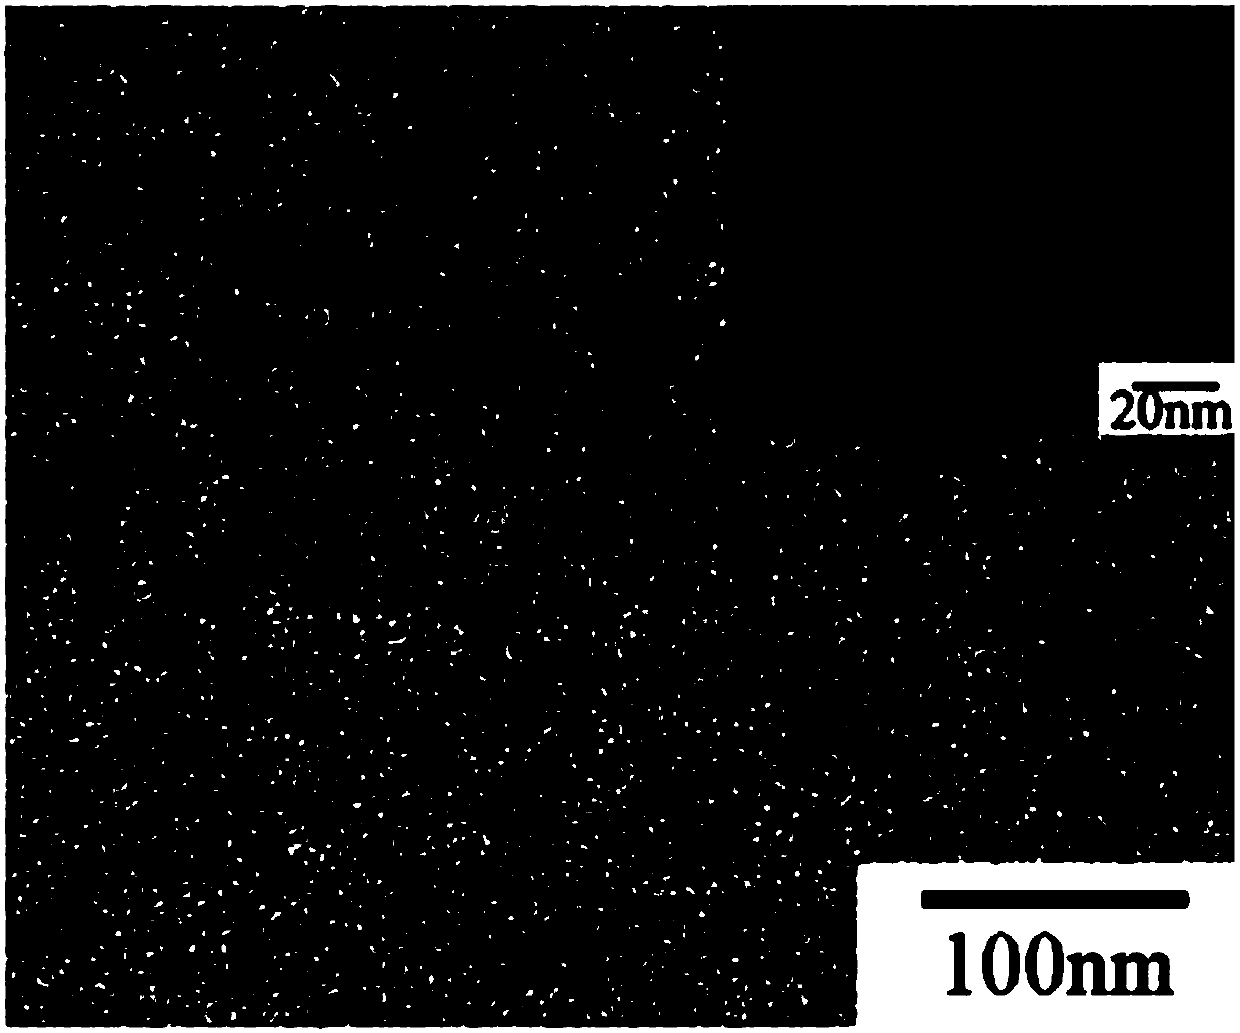 Silver nano-particle hybrid supramolecular hydrogel based on cyclodextrin/PEG grafted polyacrylic acid, and preparation method and application thereof